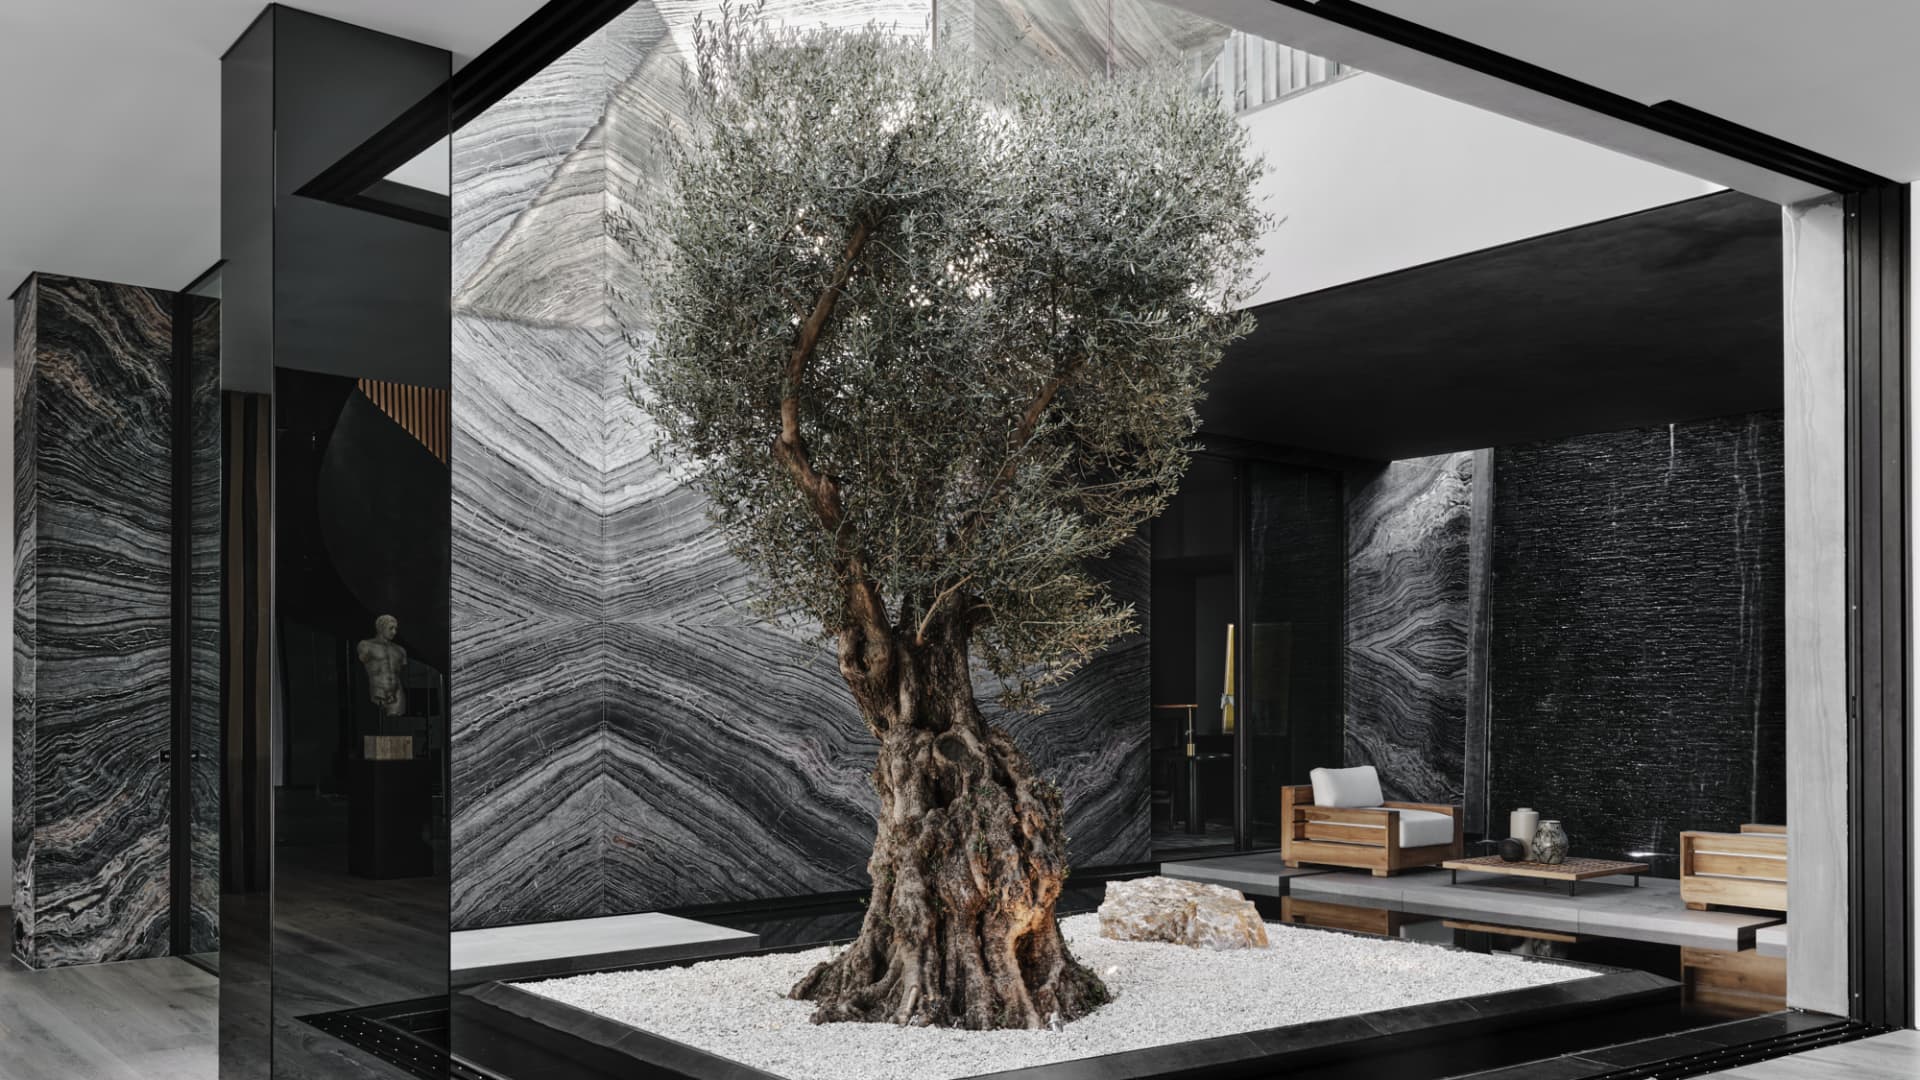 The home's interior courtyard features a 150-year-old olive tree.